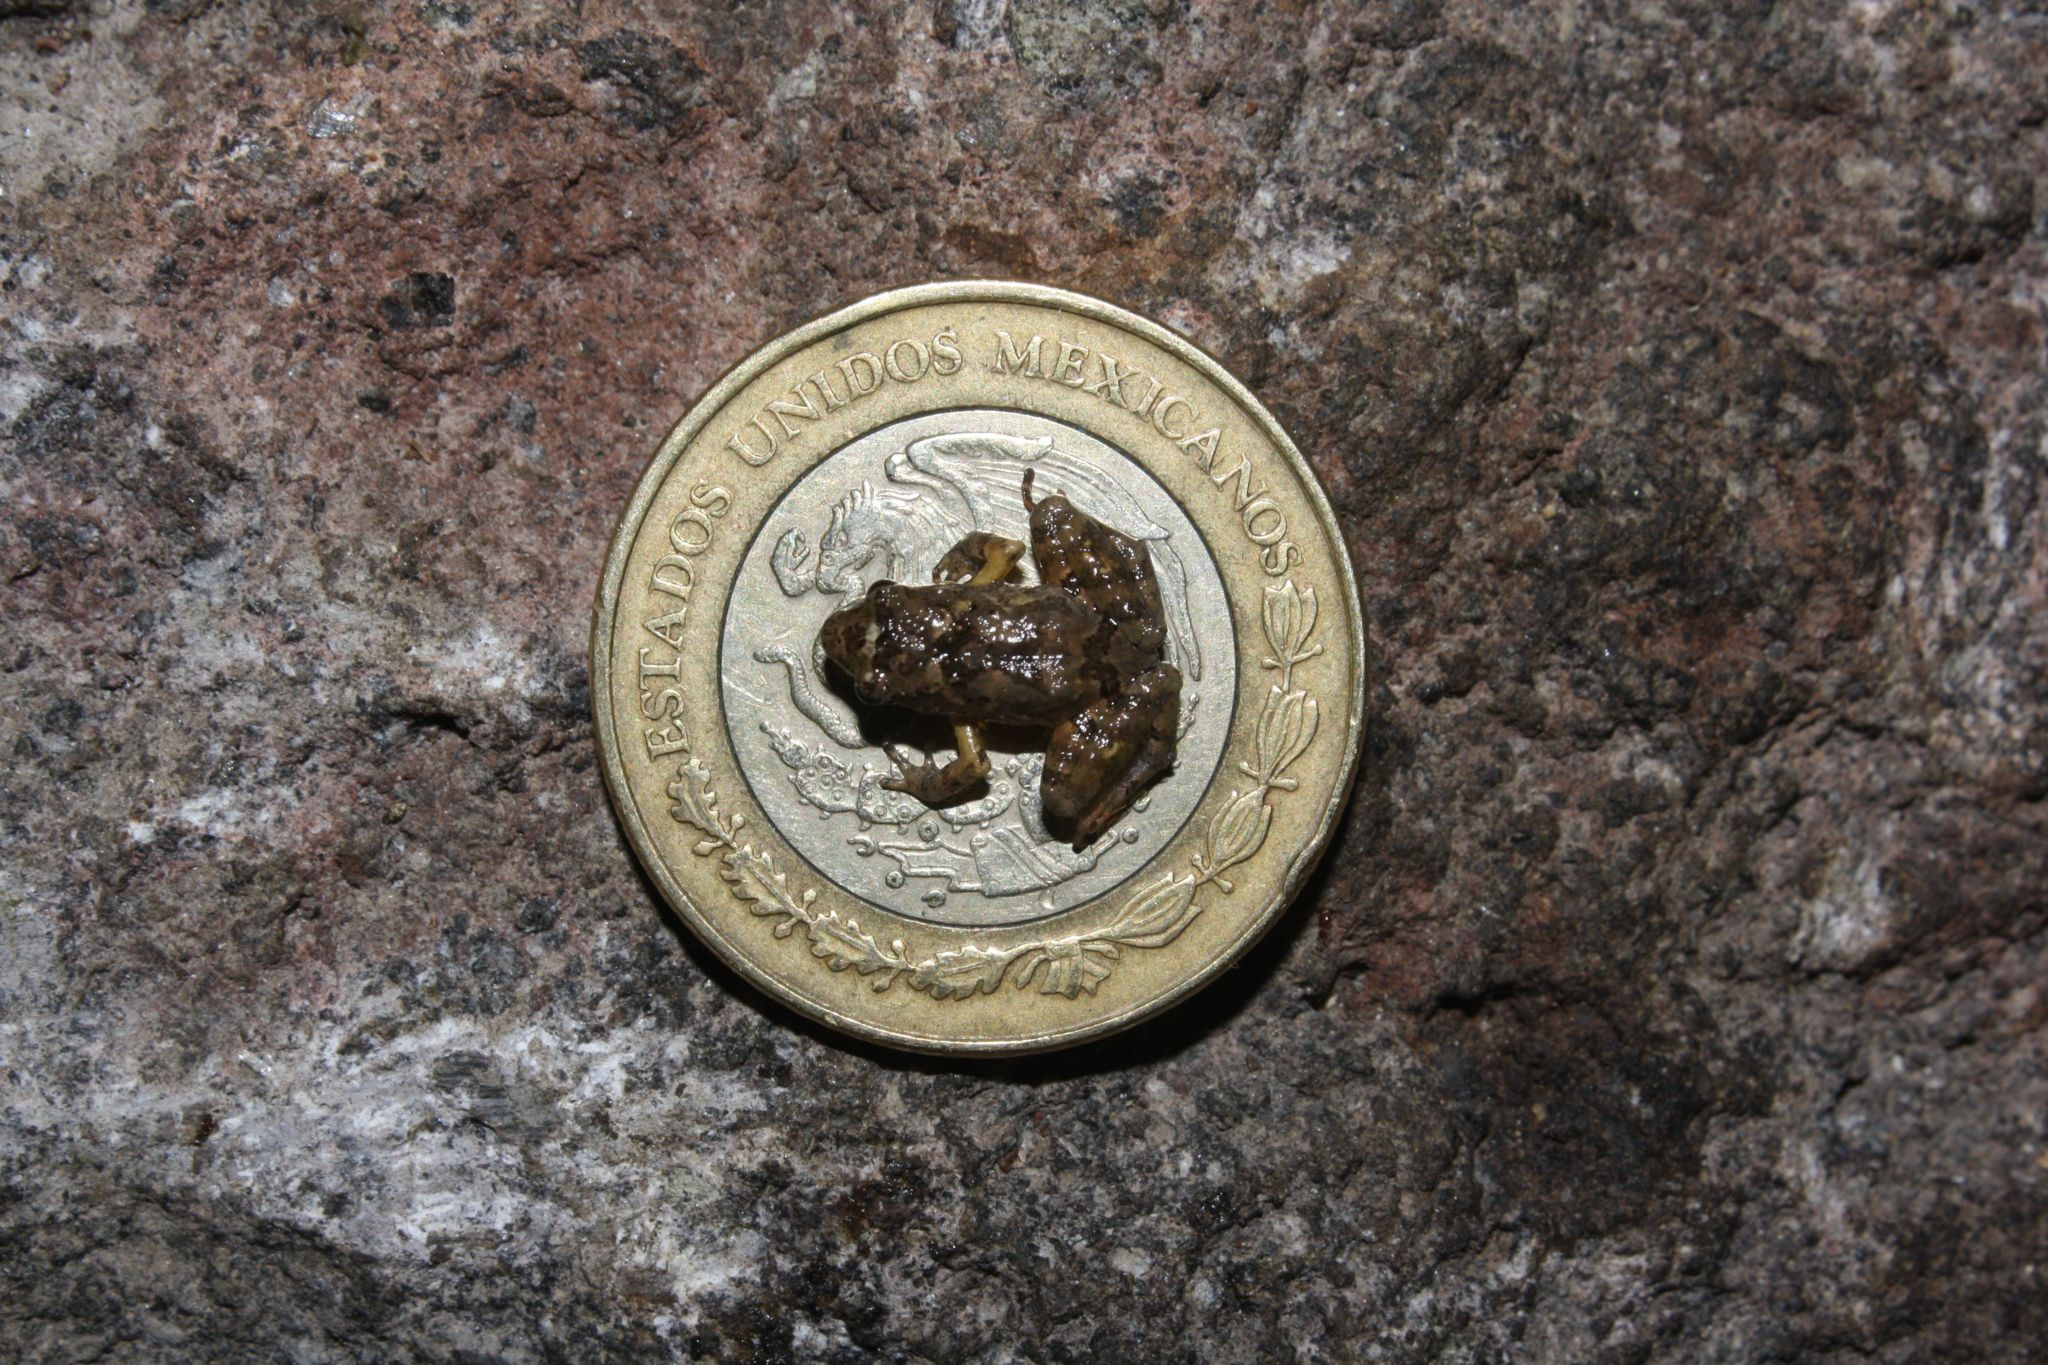 Tiny frog sitting on Mexican coin